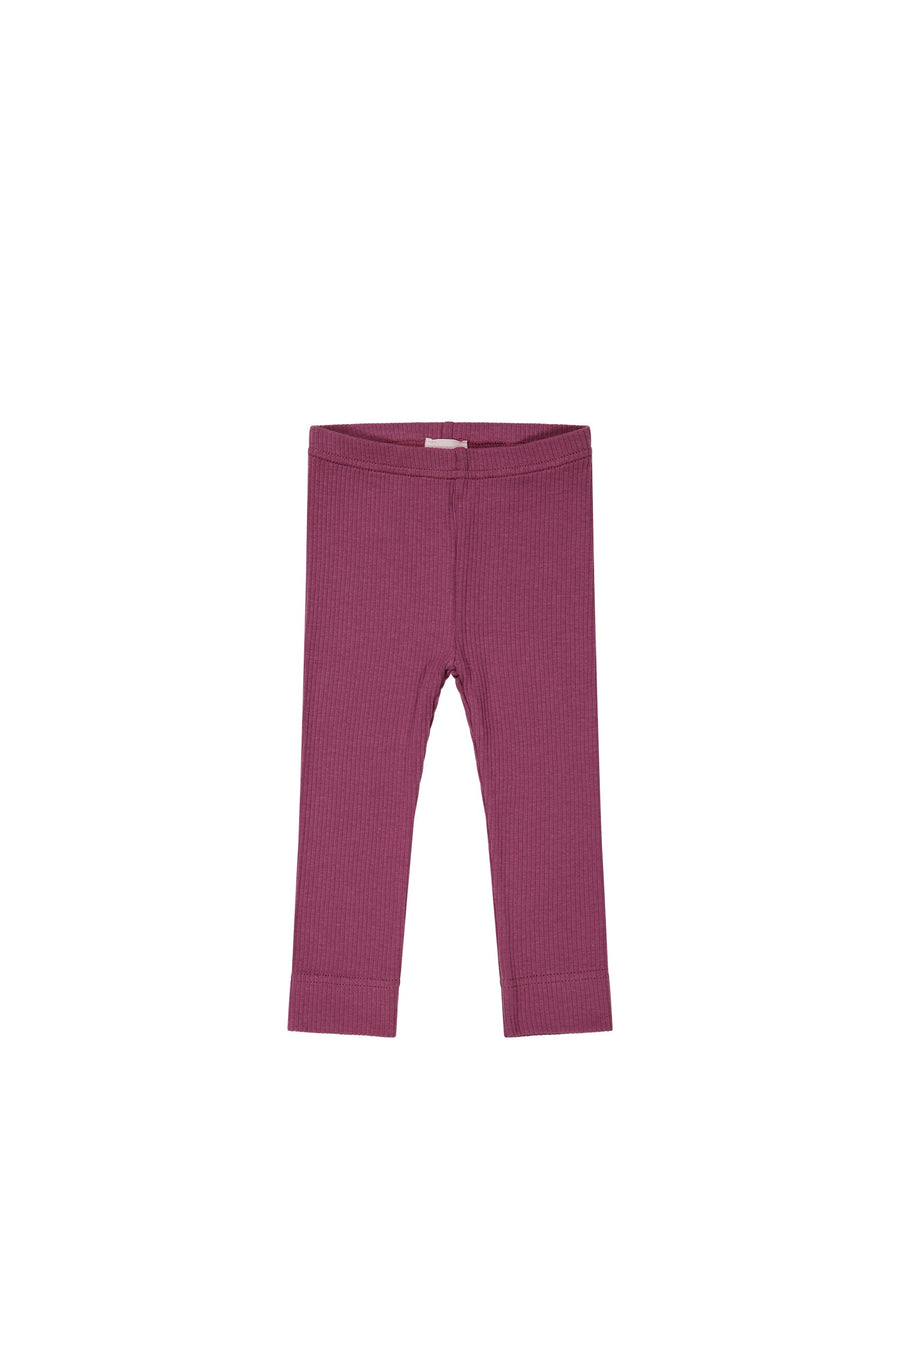 Organic Cotton Modal Everyday Legging - Berry Compote